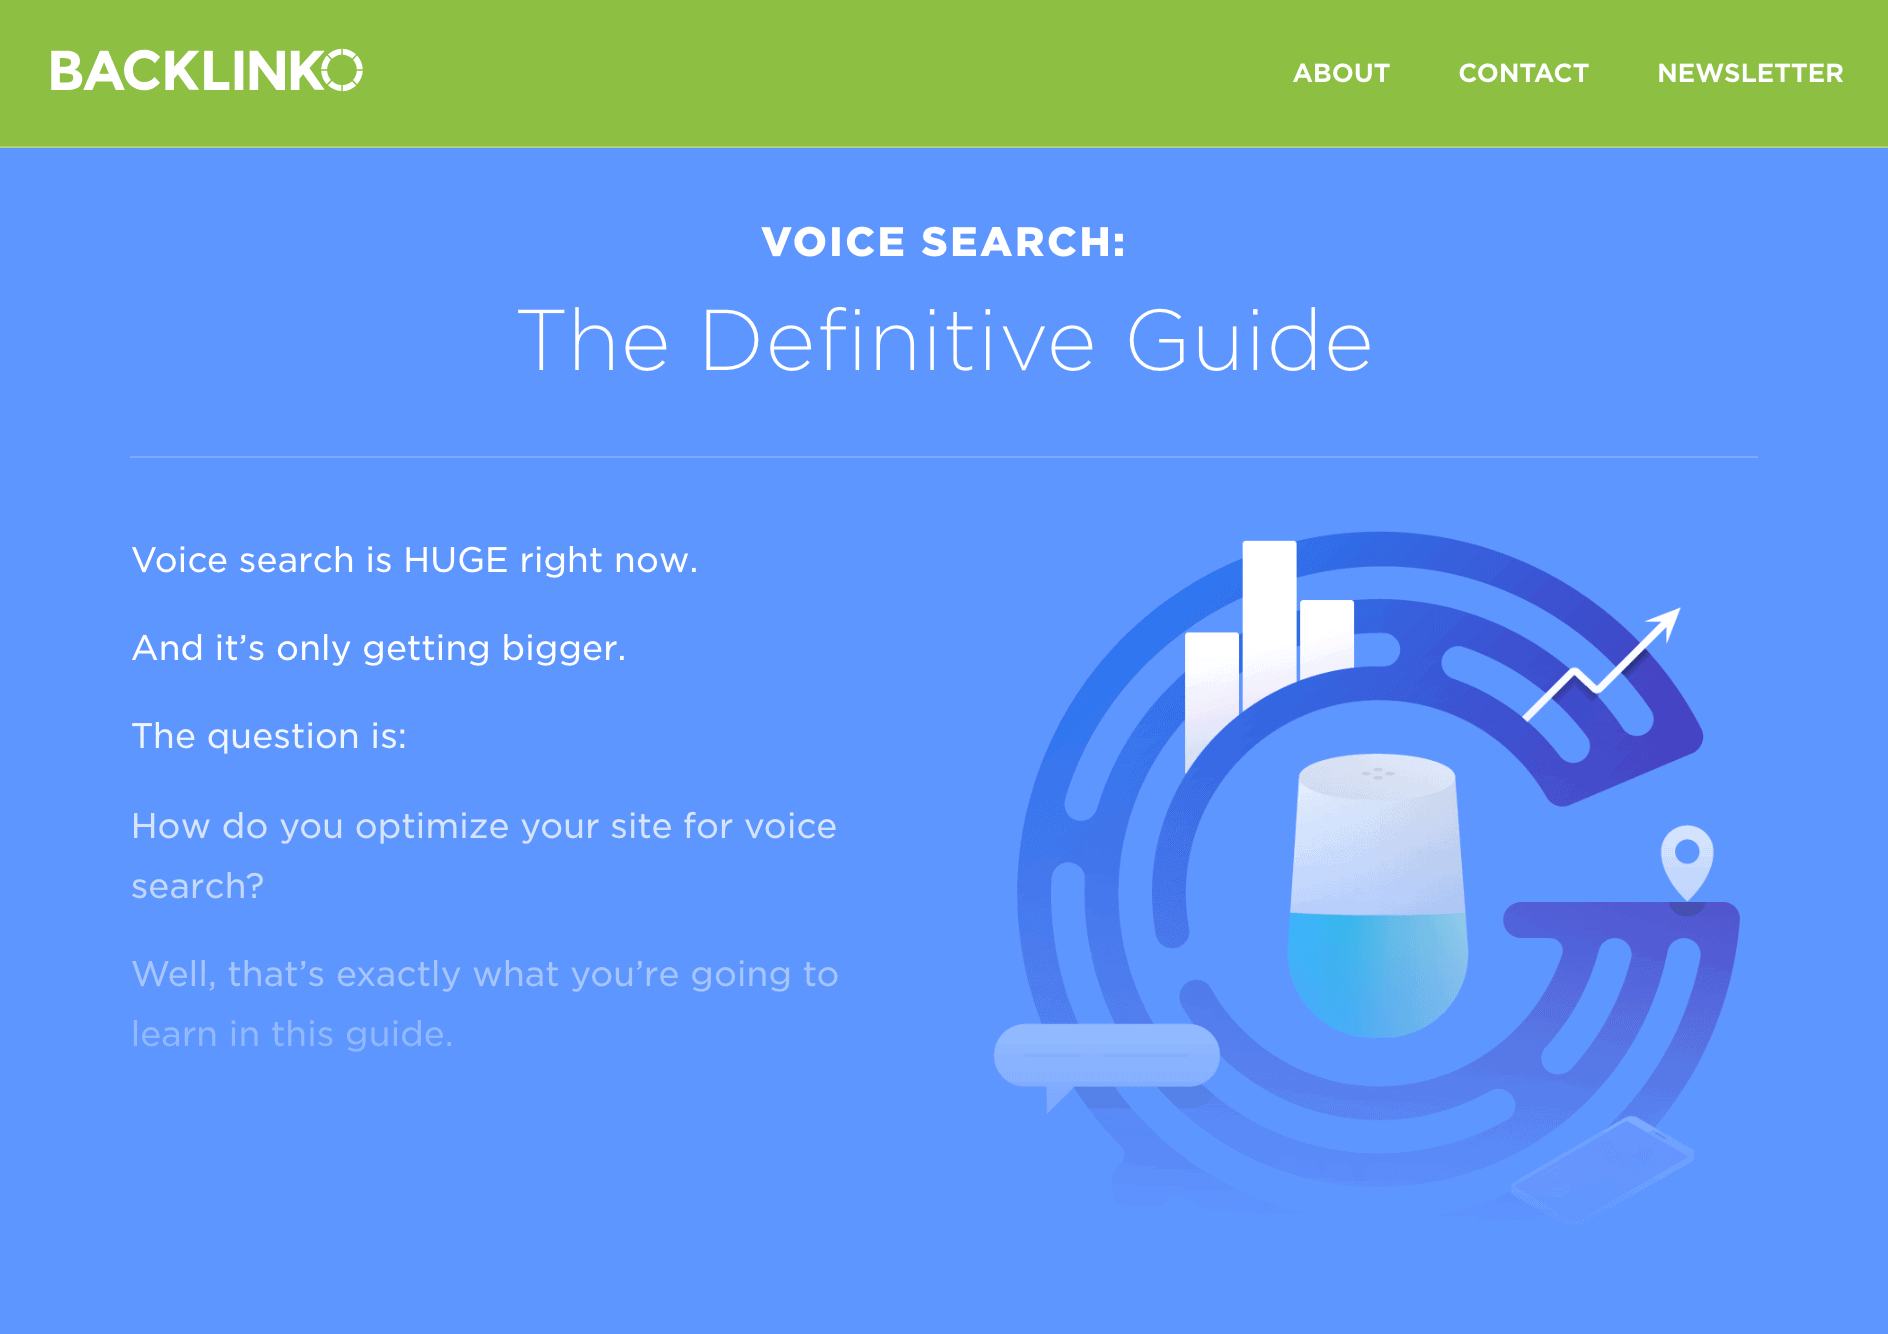 Optimize for Voice Search – Post